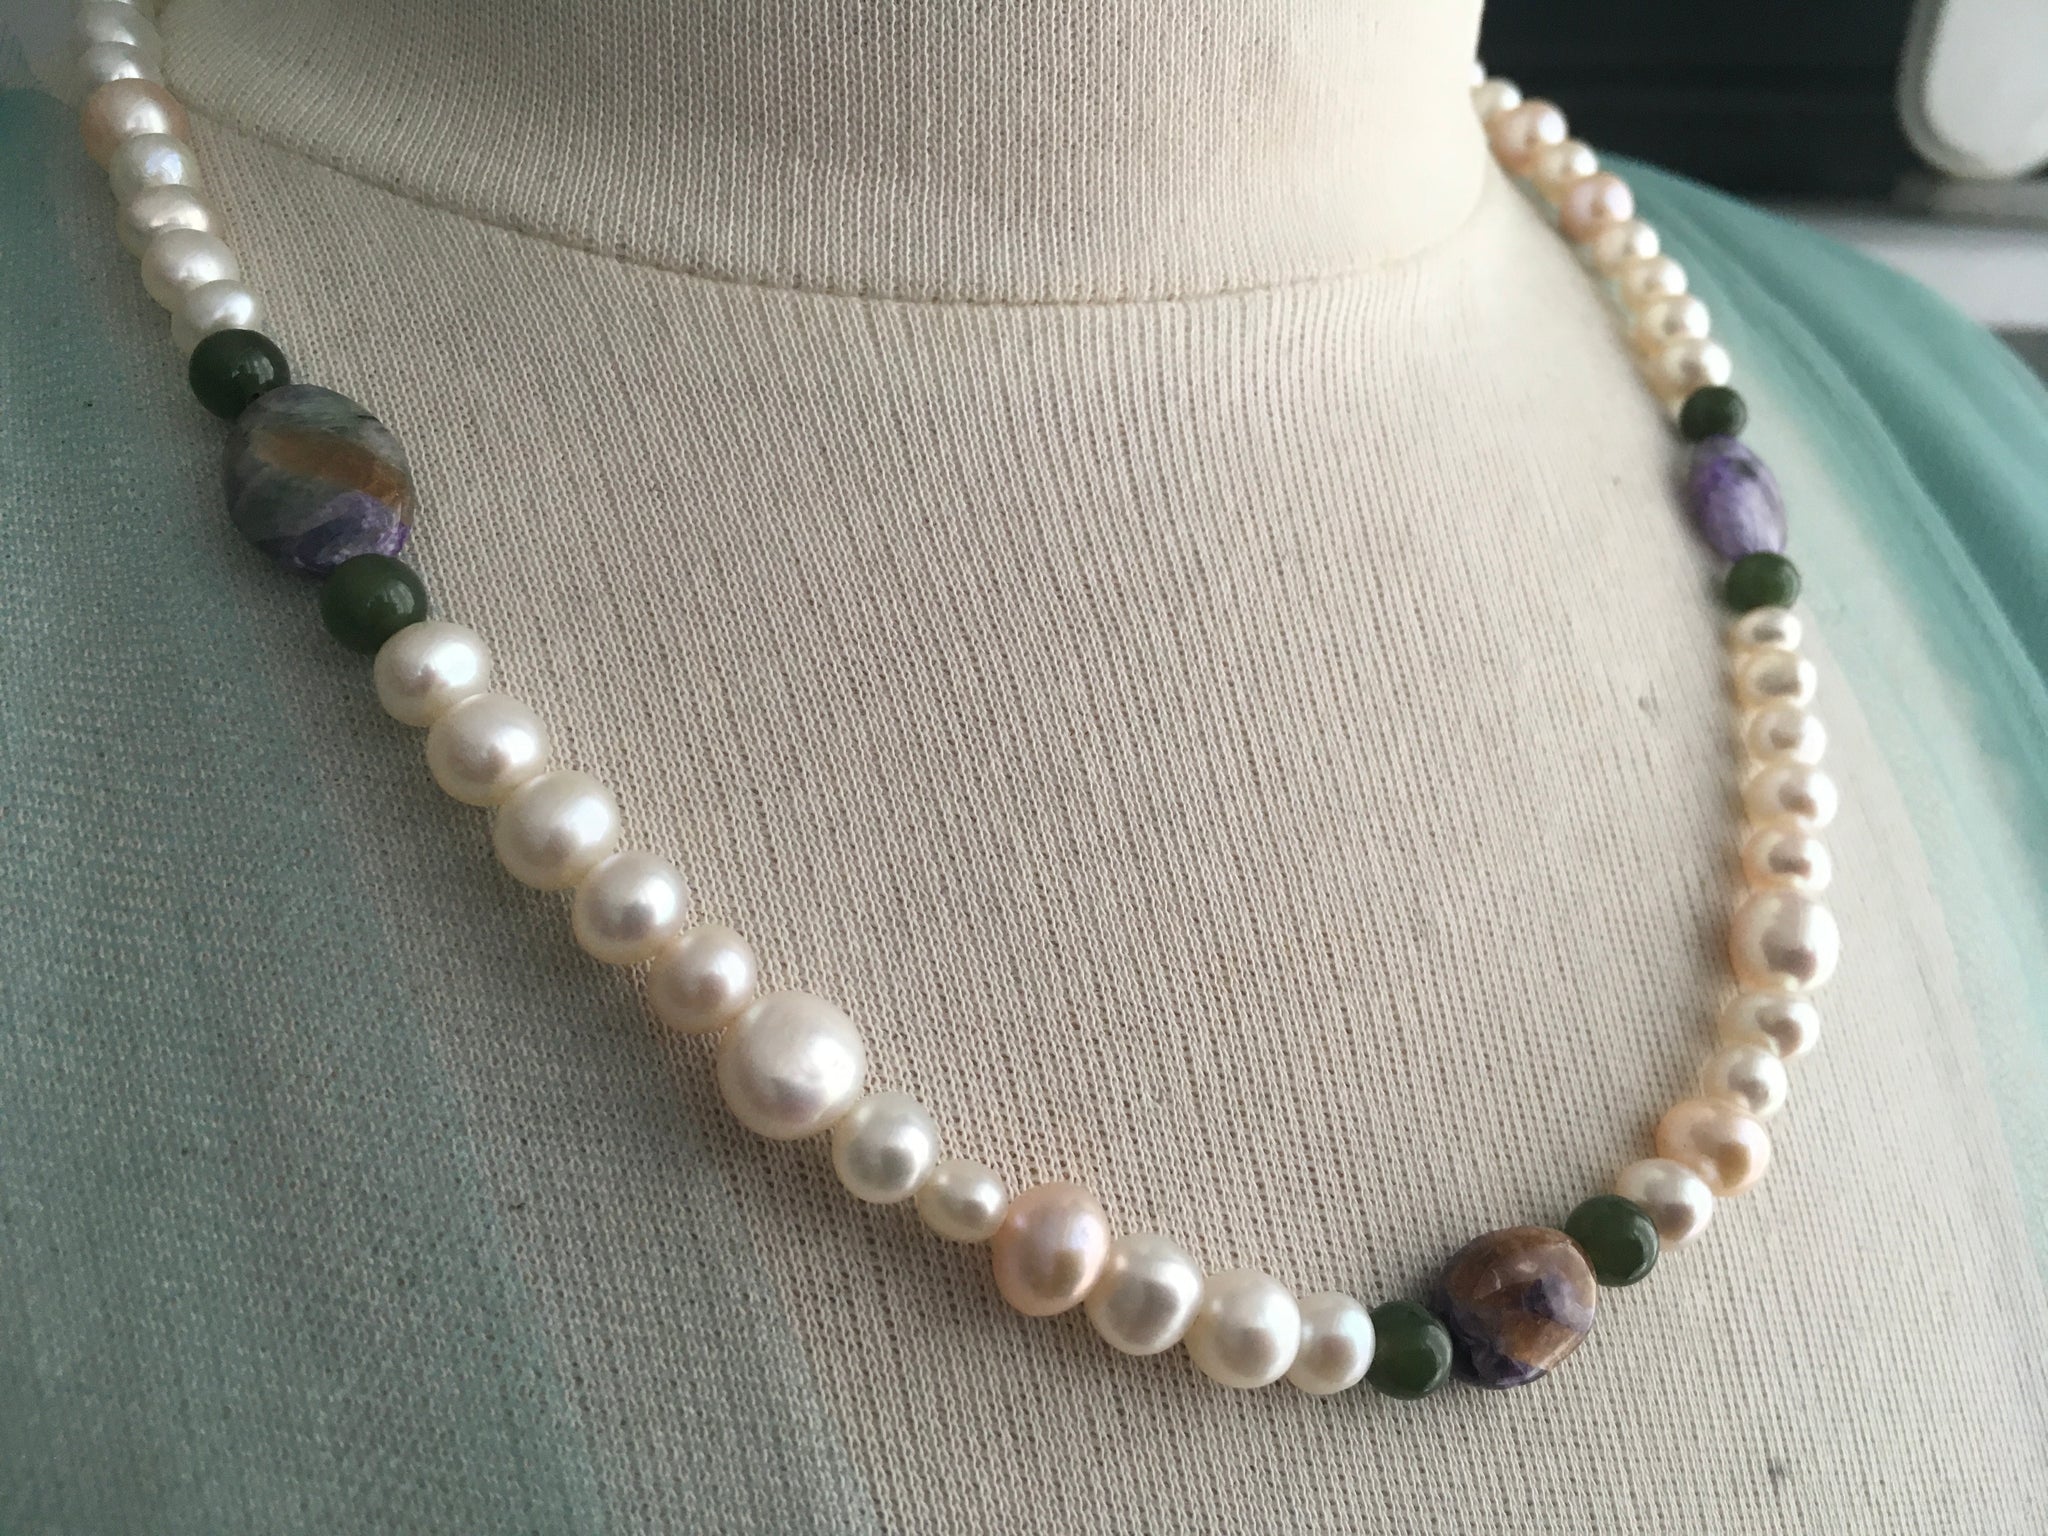 Single Strand Real Pearl Necklace for Man or Woman | Freshwater Cultured with Jade and Russian Opal | Sterling Silver Toggle Pendant  Bourdage Pearls    sherri bourdage